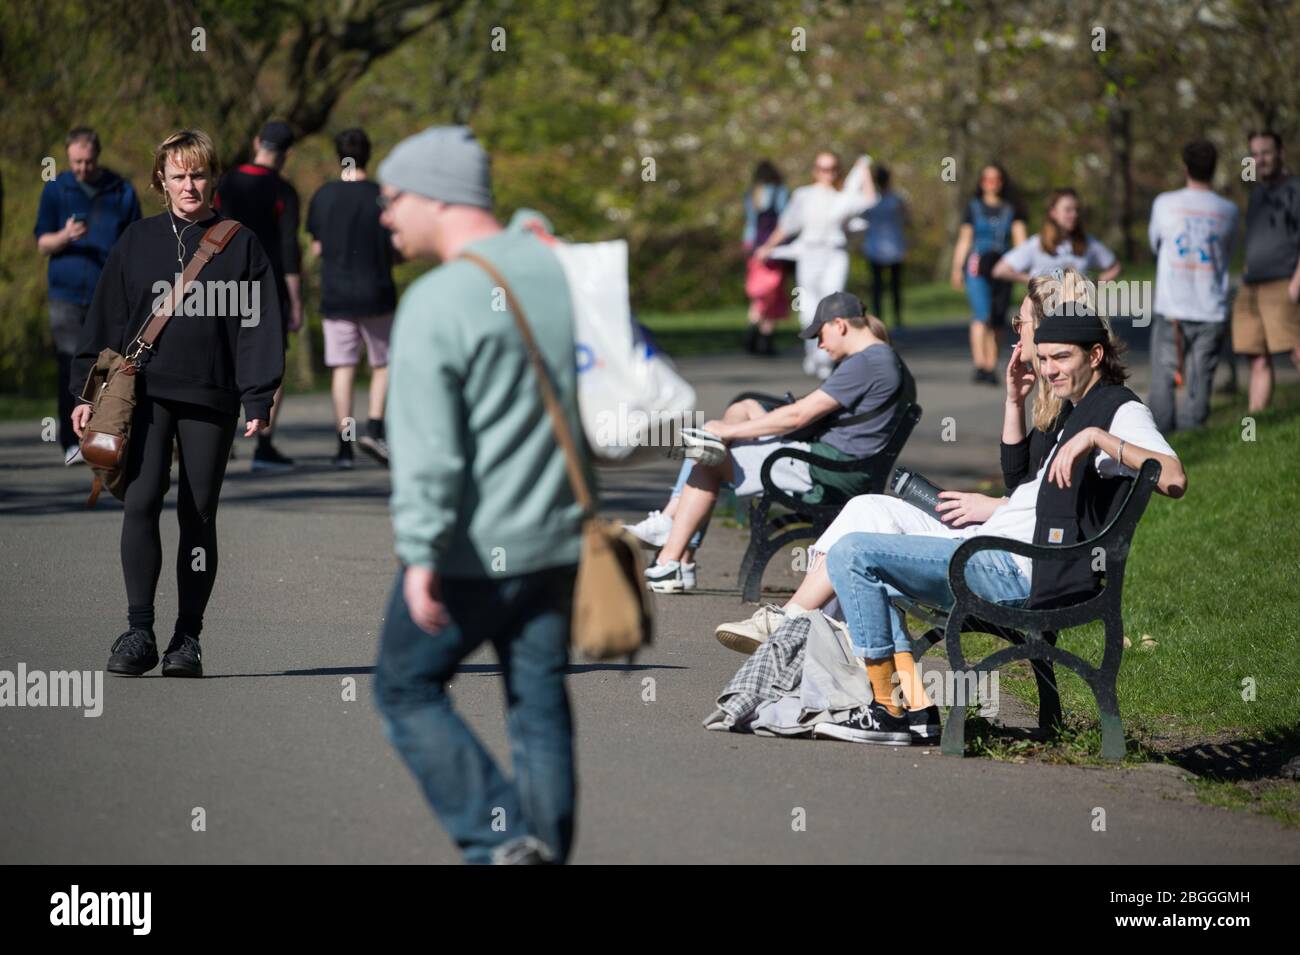 Glasgow, UK. 21st Apr, 2020. Pictured: The park seems quite busy with people as everyone goes out to enjoy the warm sunshine and blue sky. Scenes from Kelvingrove Park in Glasgow during the coronavirus (COVID-19) lockdown. Credit: Colin Fisher/Alamy Live News Stock Photo